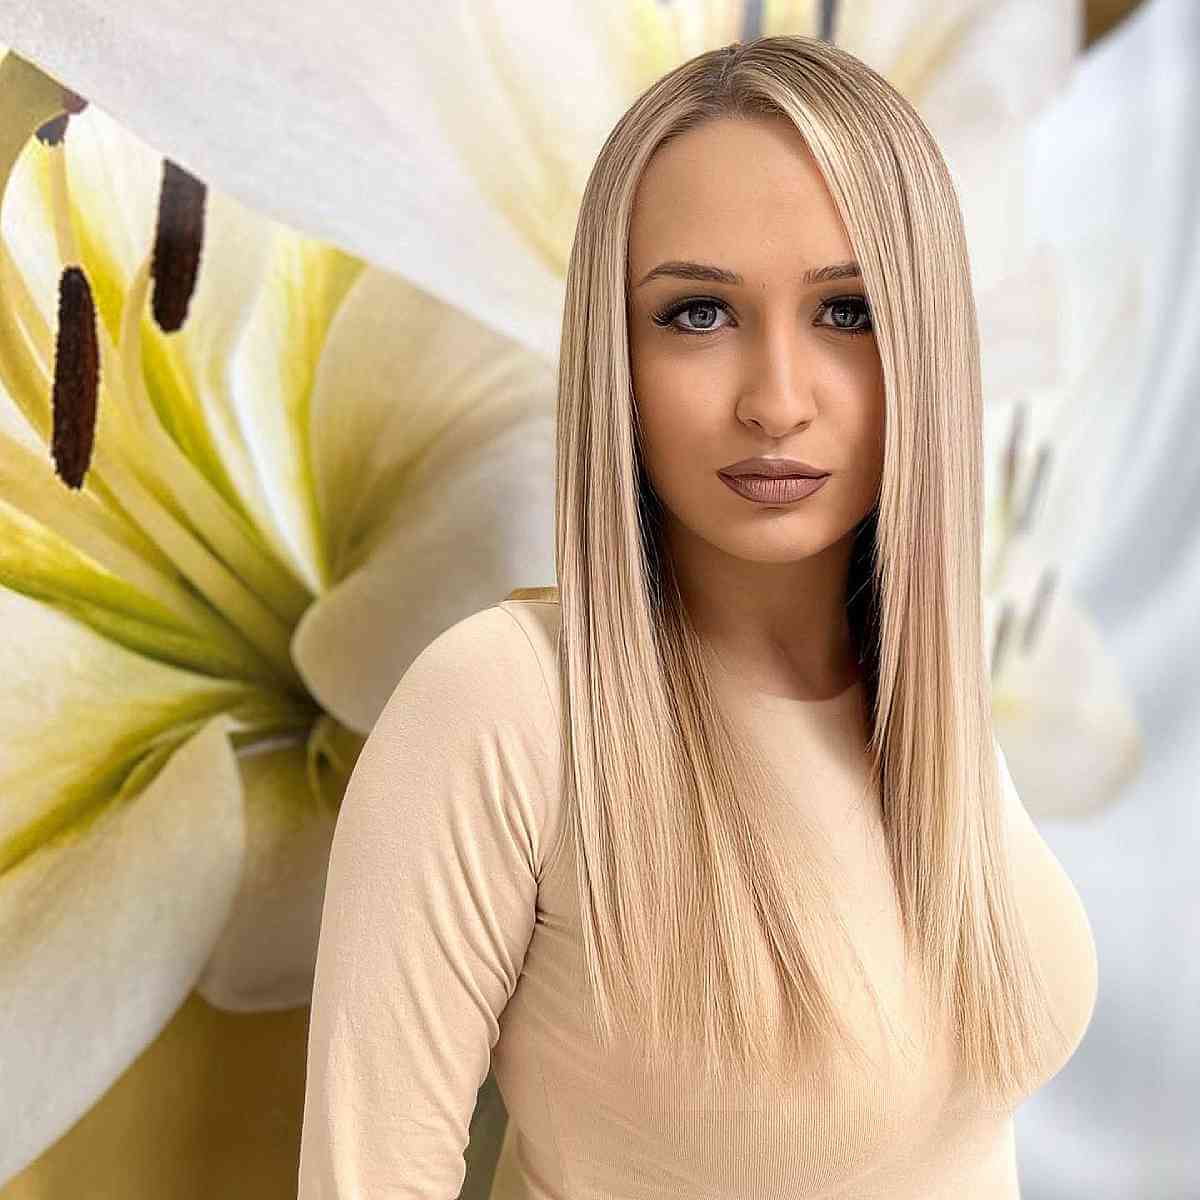 Long Straight Fine Blonde Hair with a Subtle Side Part